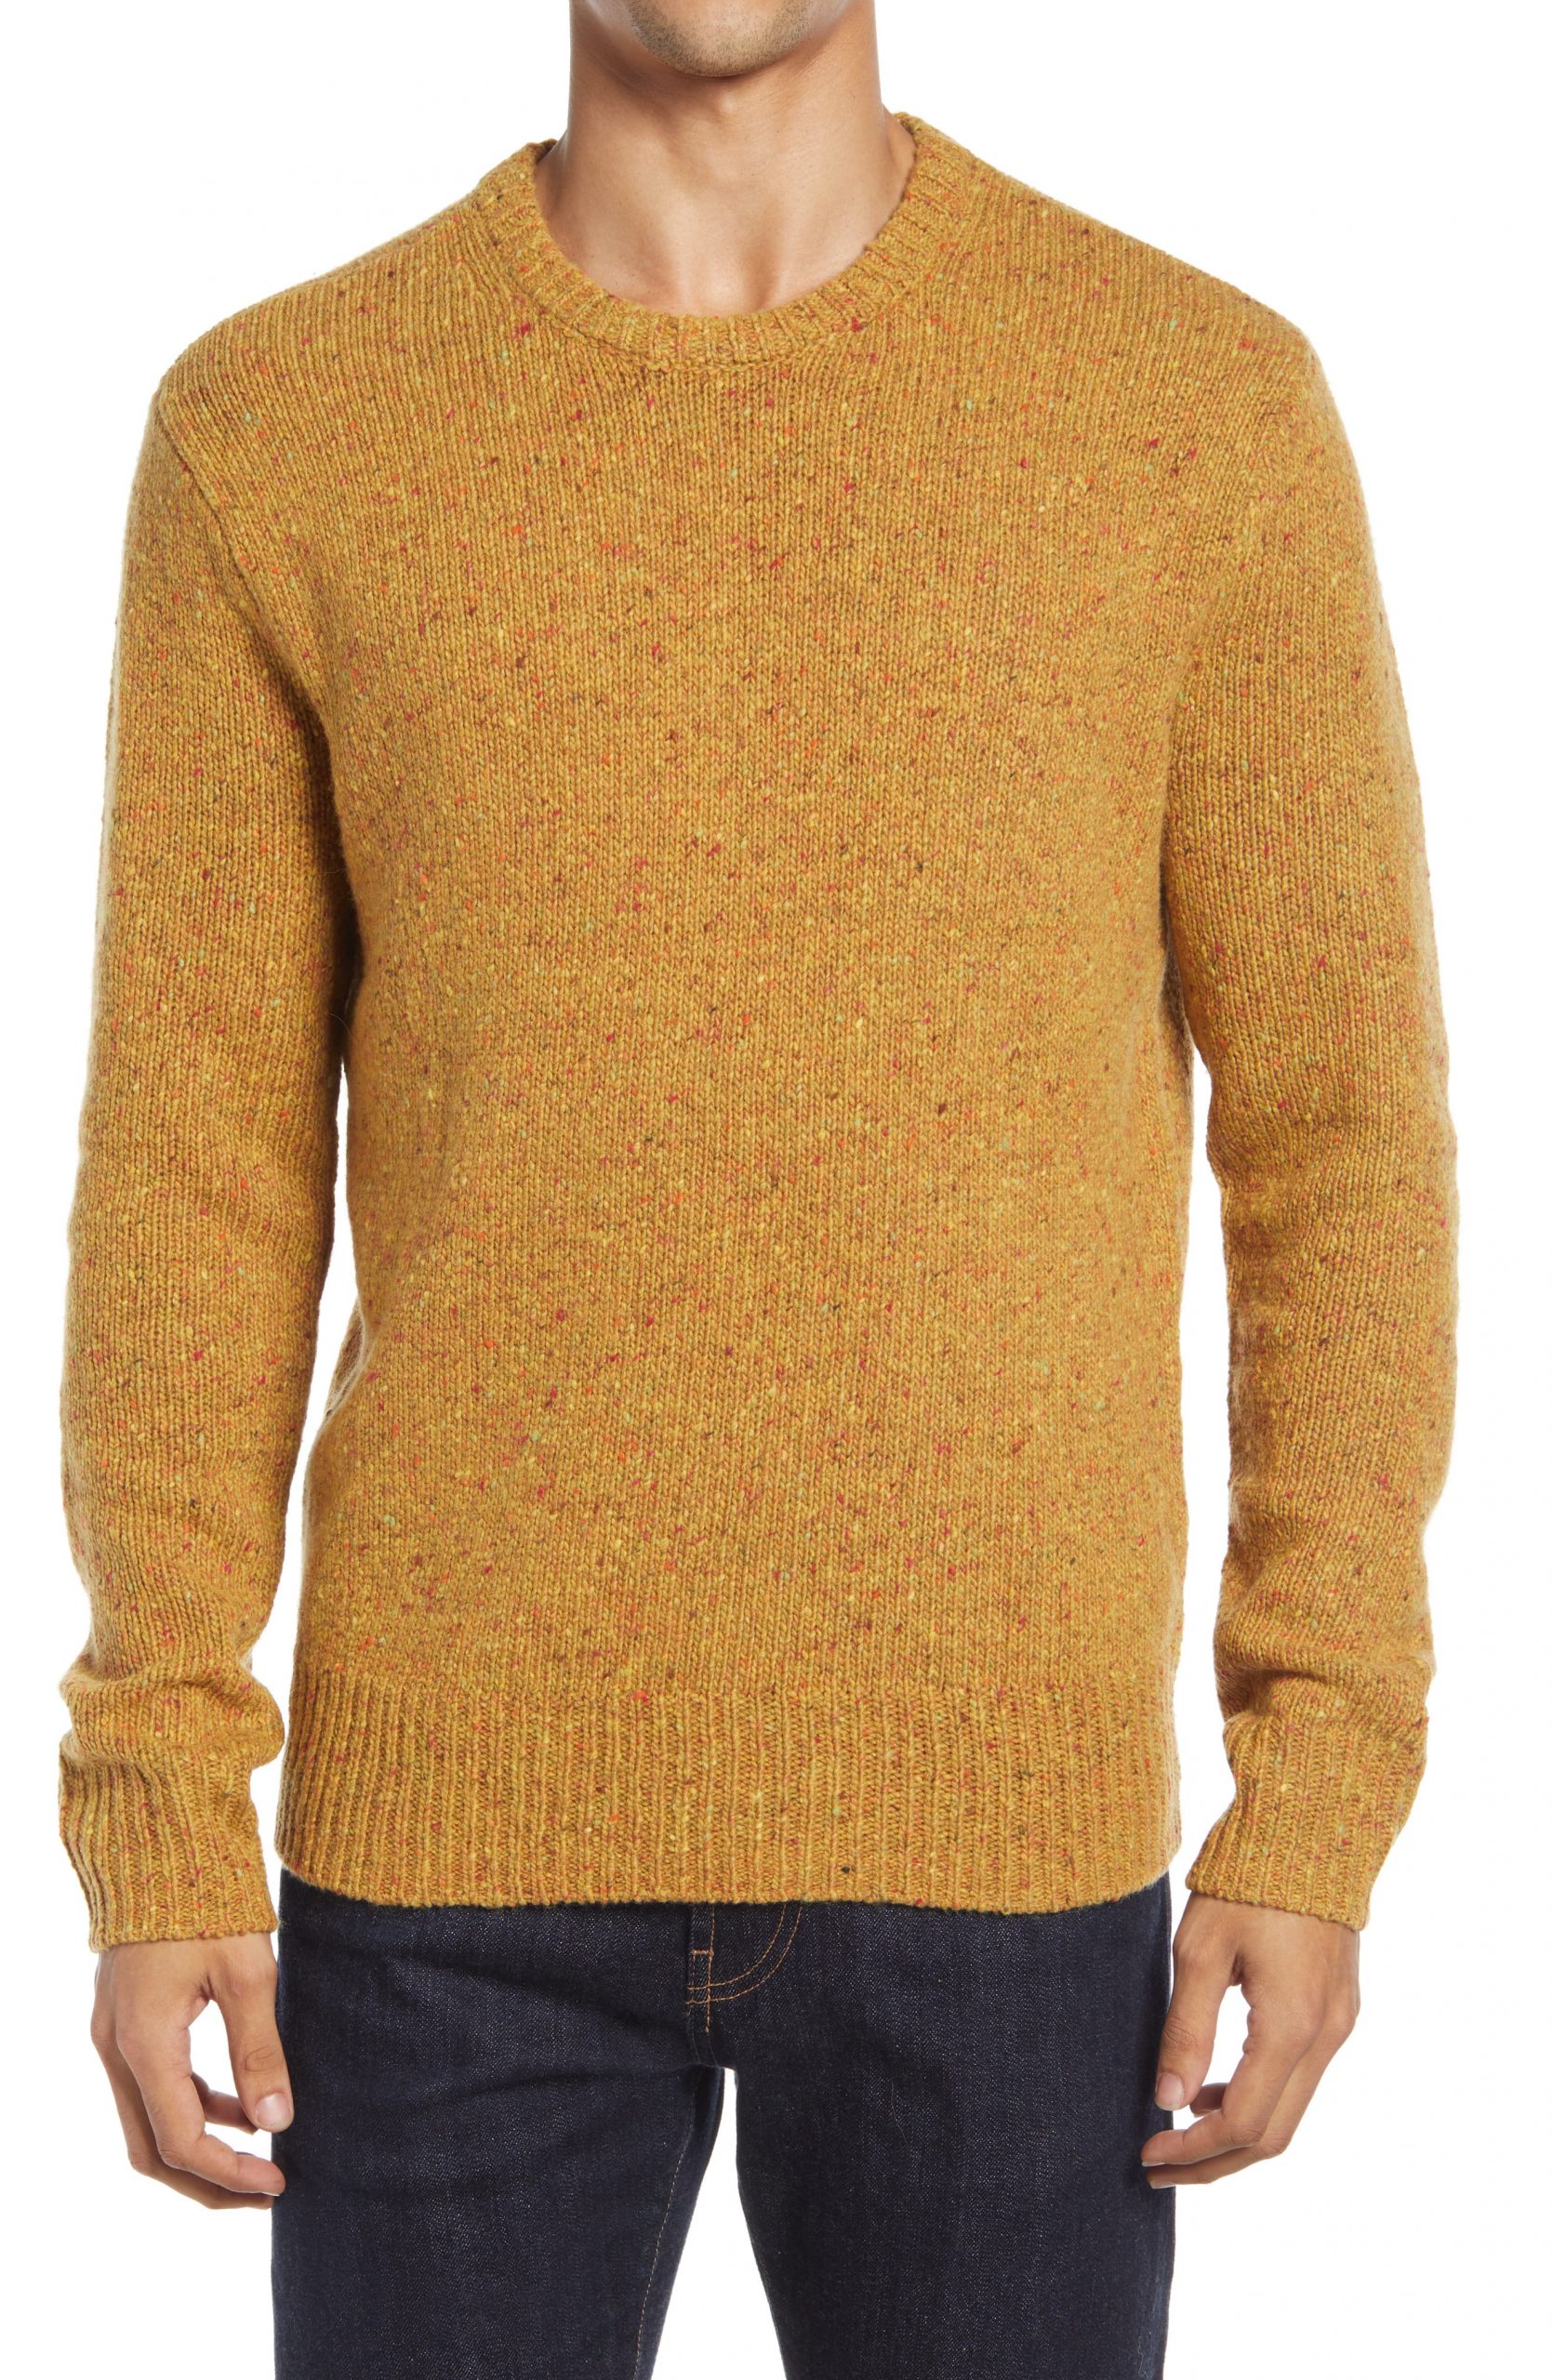 Men’s Madewell Crewneck Sweater, Size Small - Brown | The Fashionisto